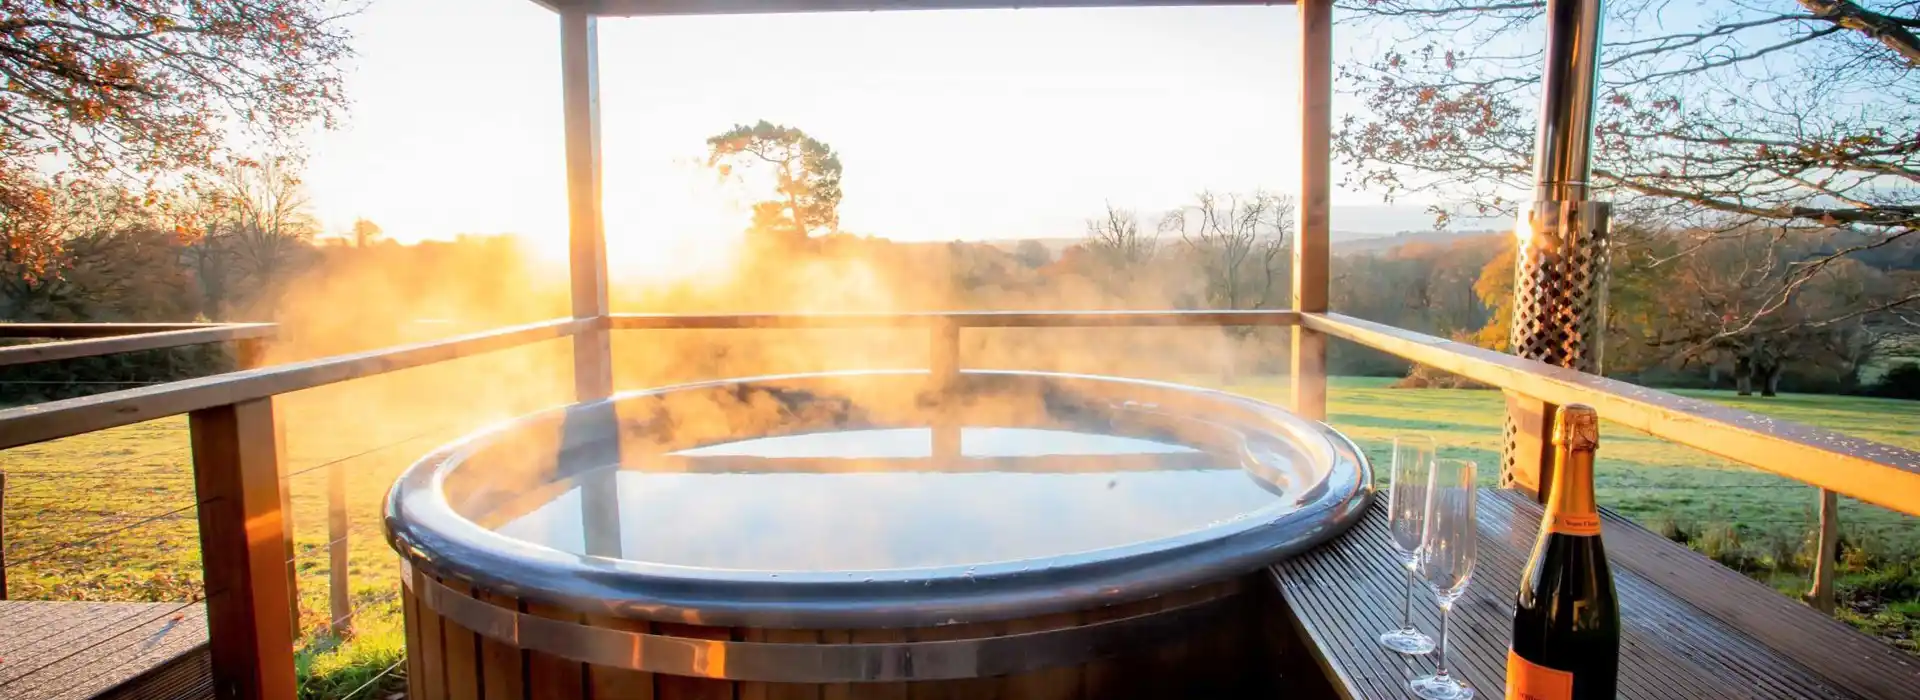 Glamping with hot tubs